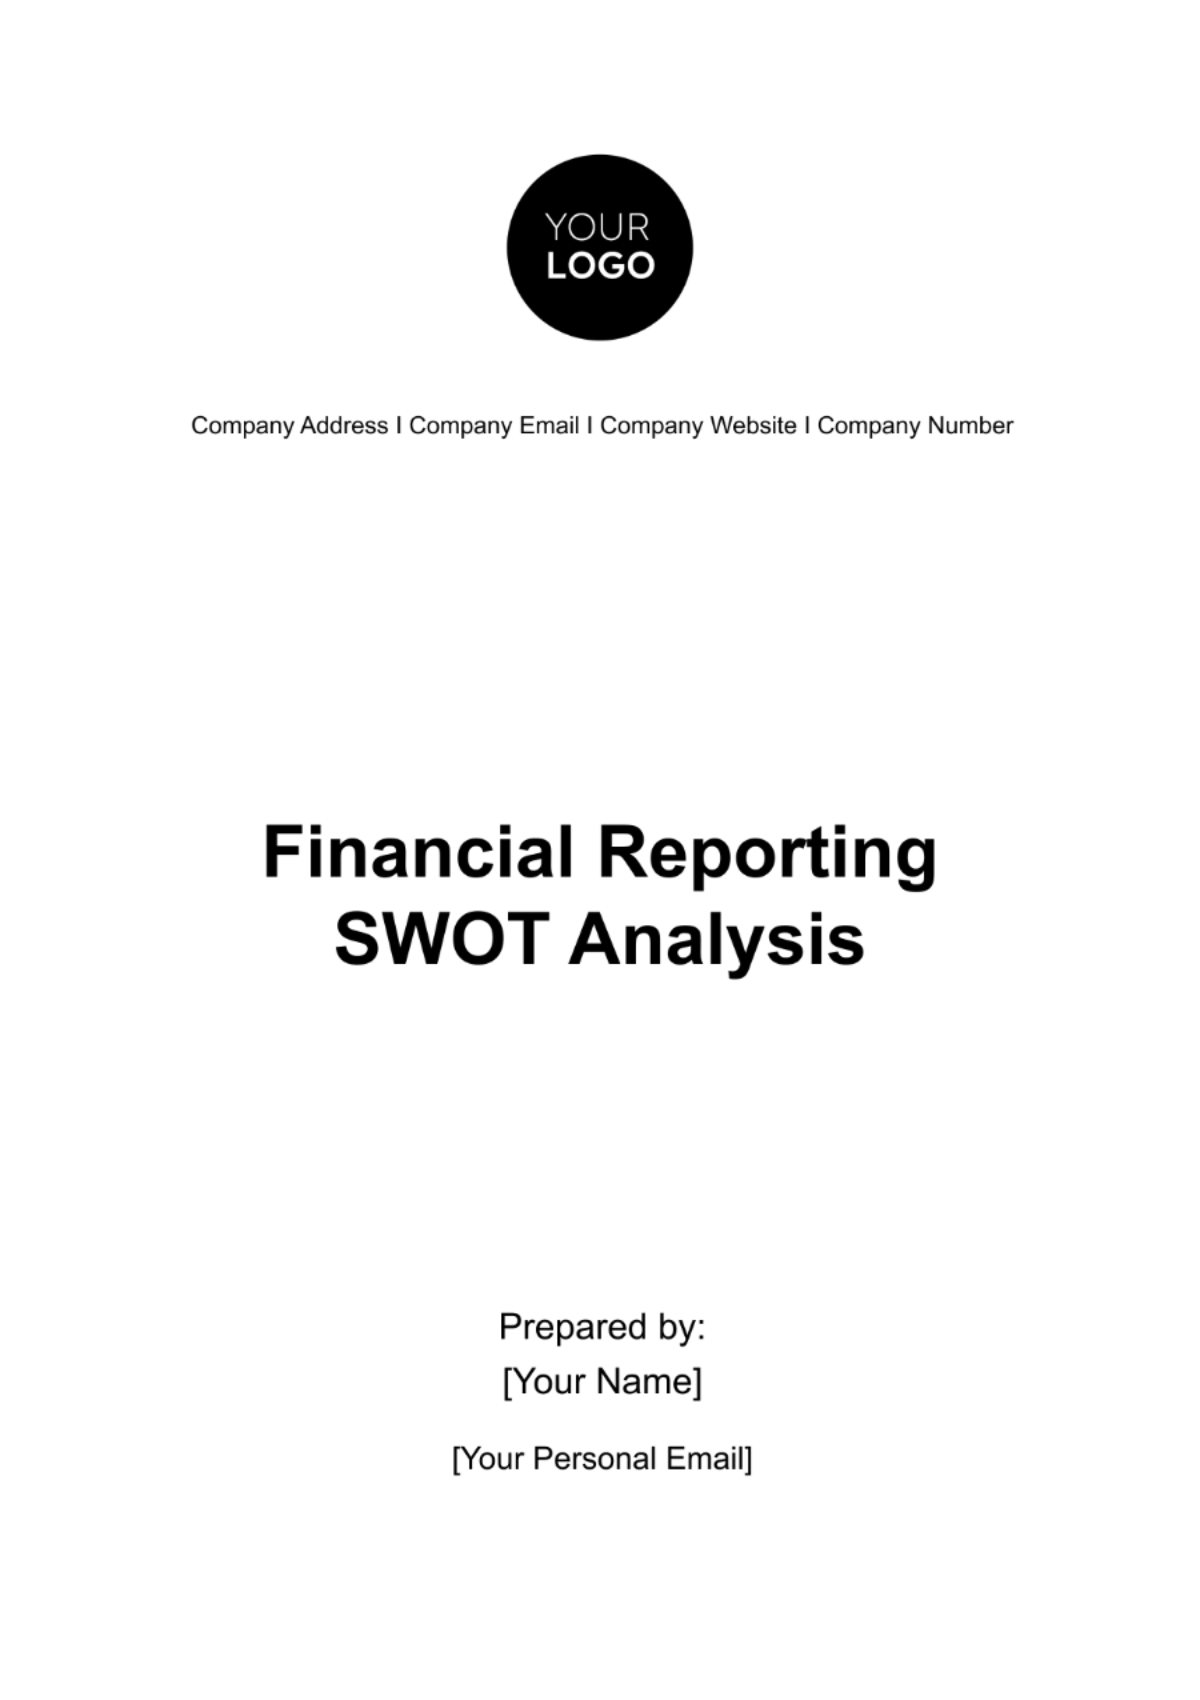 Free Financial Reporting SWOT Analysis Template